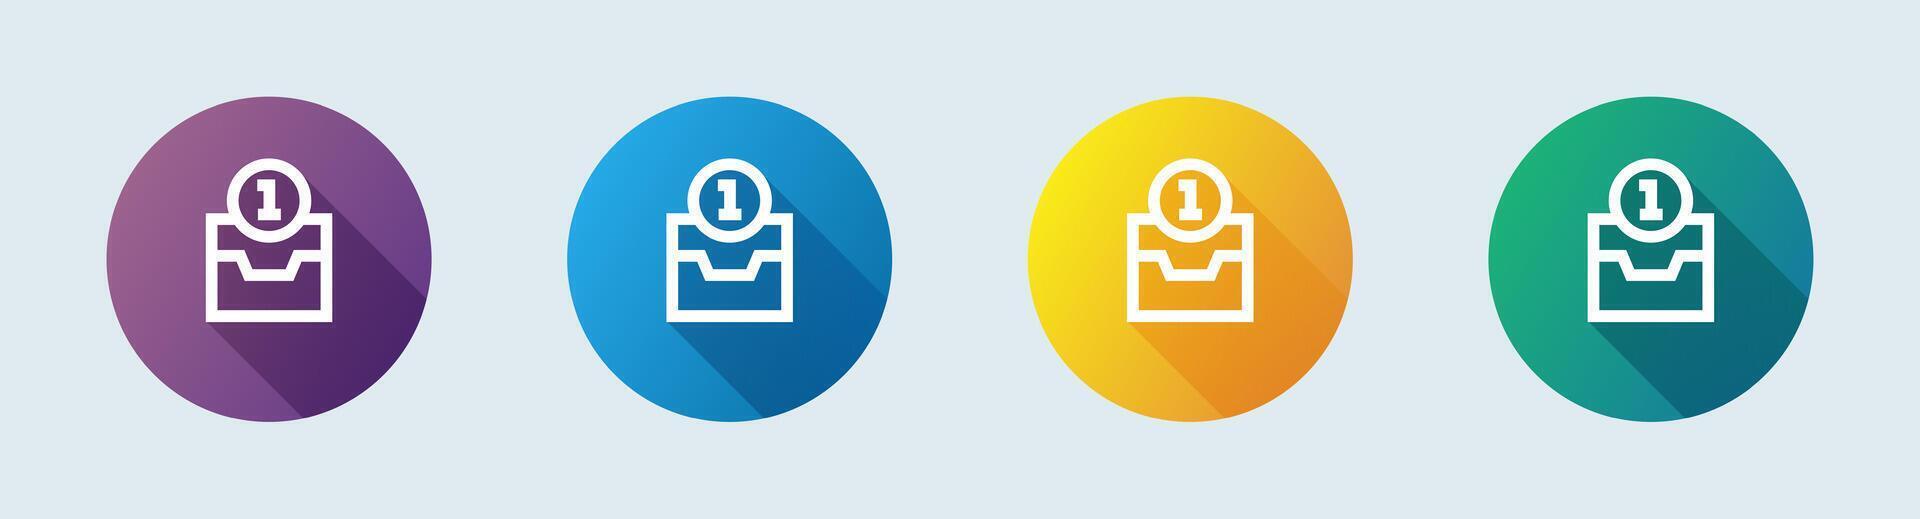 Direct message line icon in flat design style. Inbox signs vector illustration.